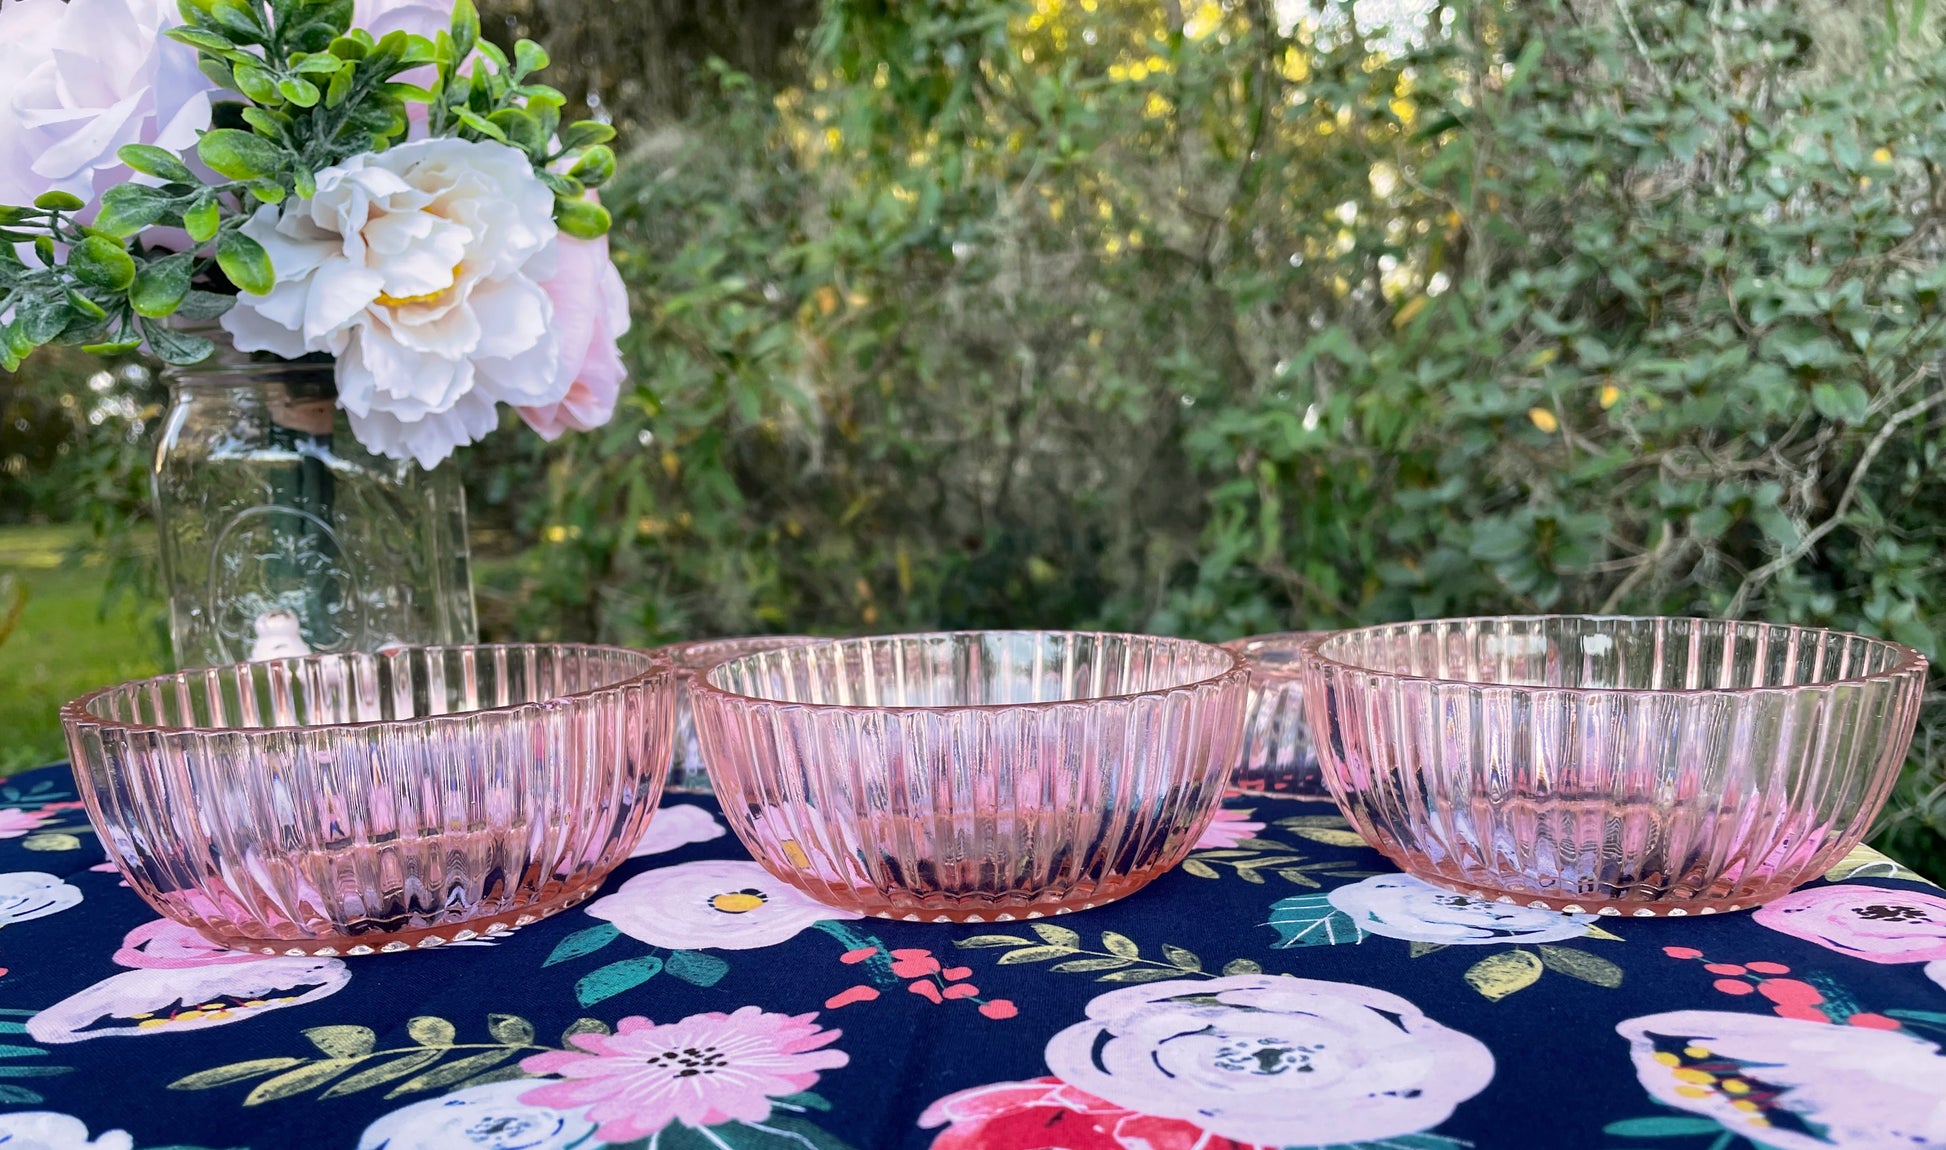 Antique Set – of Glass Anchor Bowls Bird Company 3 The Pink Mary Broken Depression Queen Hocking